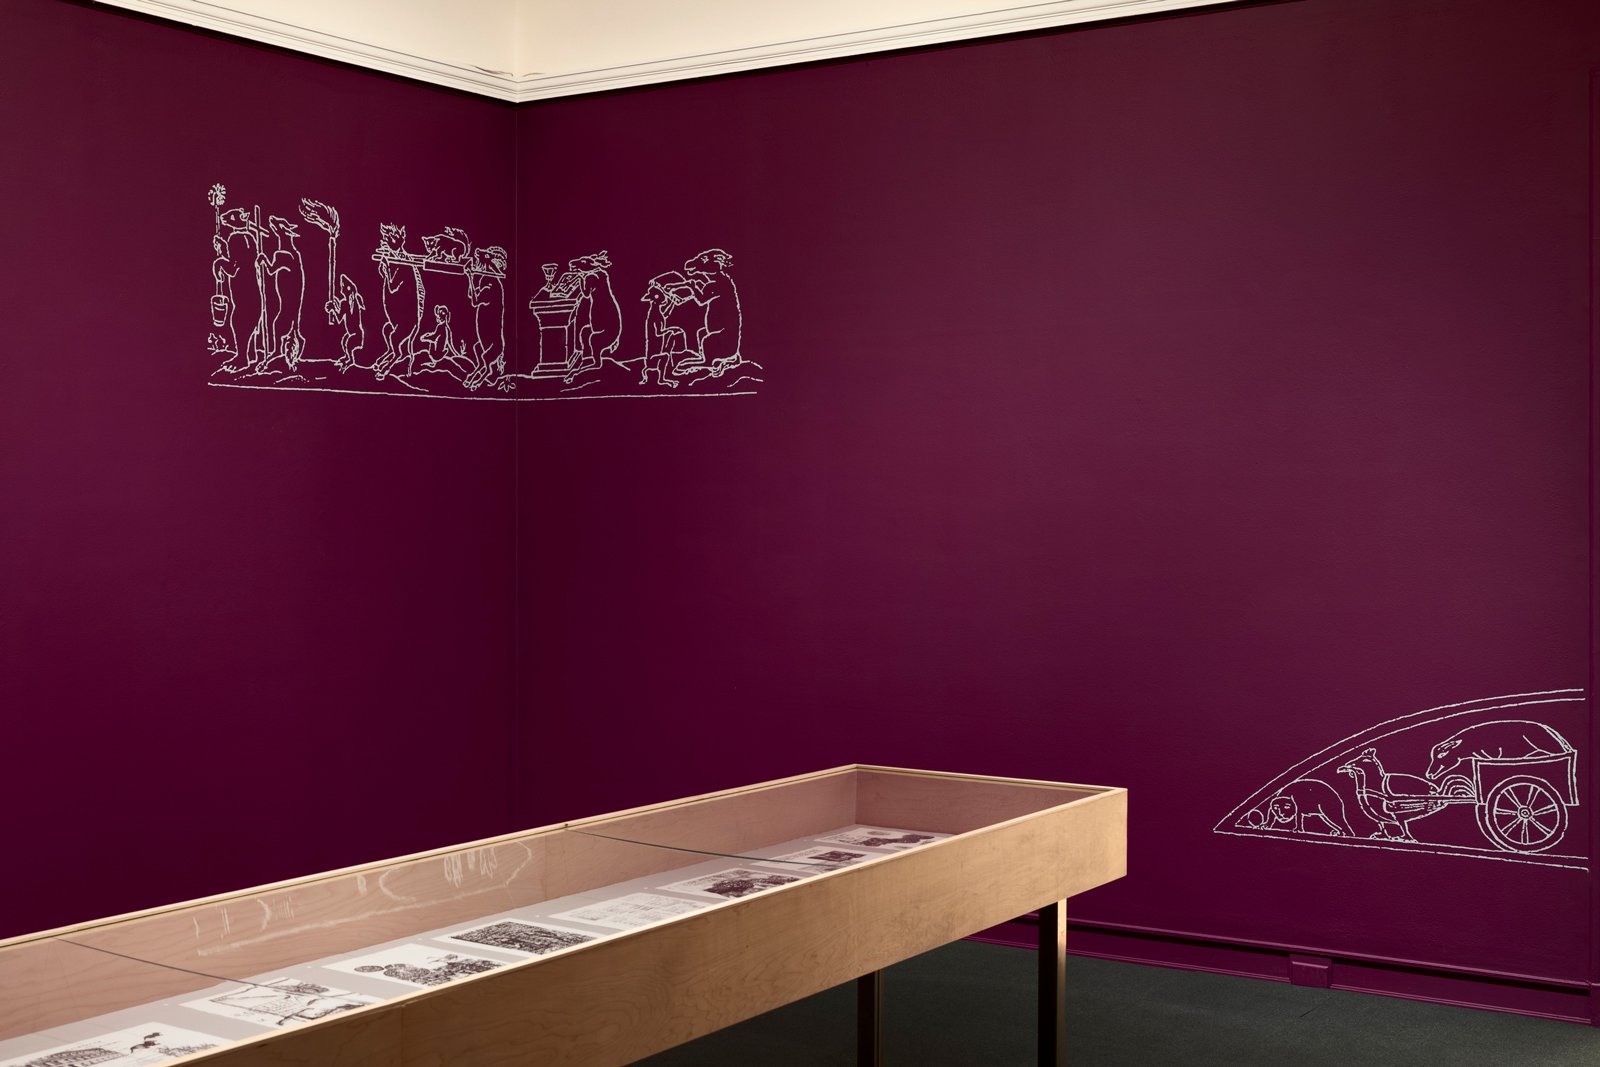  Henry Art Gallery, series of photocopy transfers, wall drawings. Photo: Jueqian Fang, 2021 